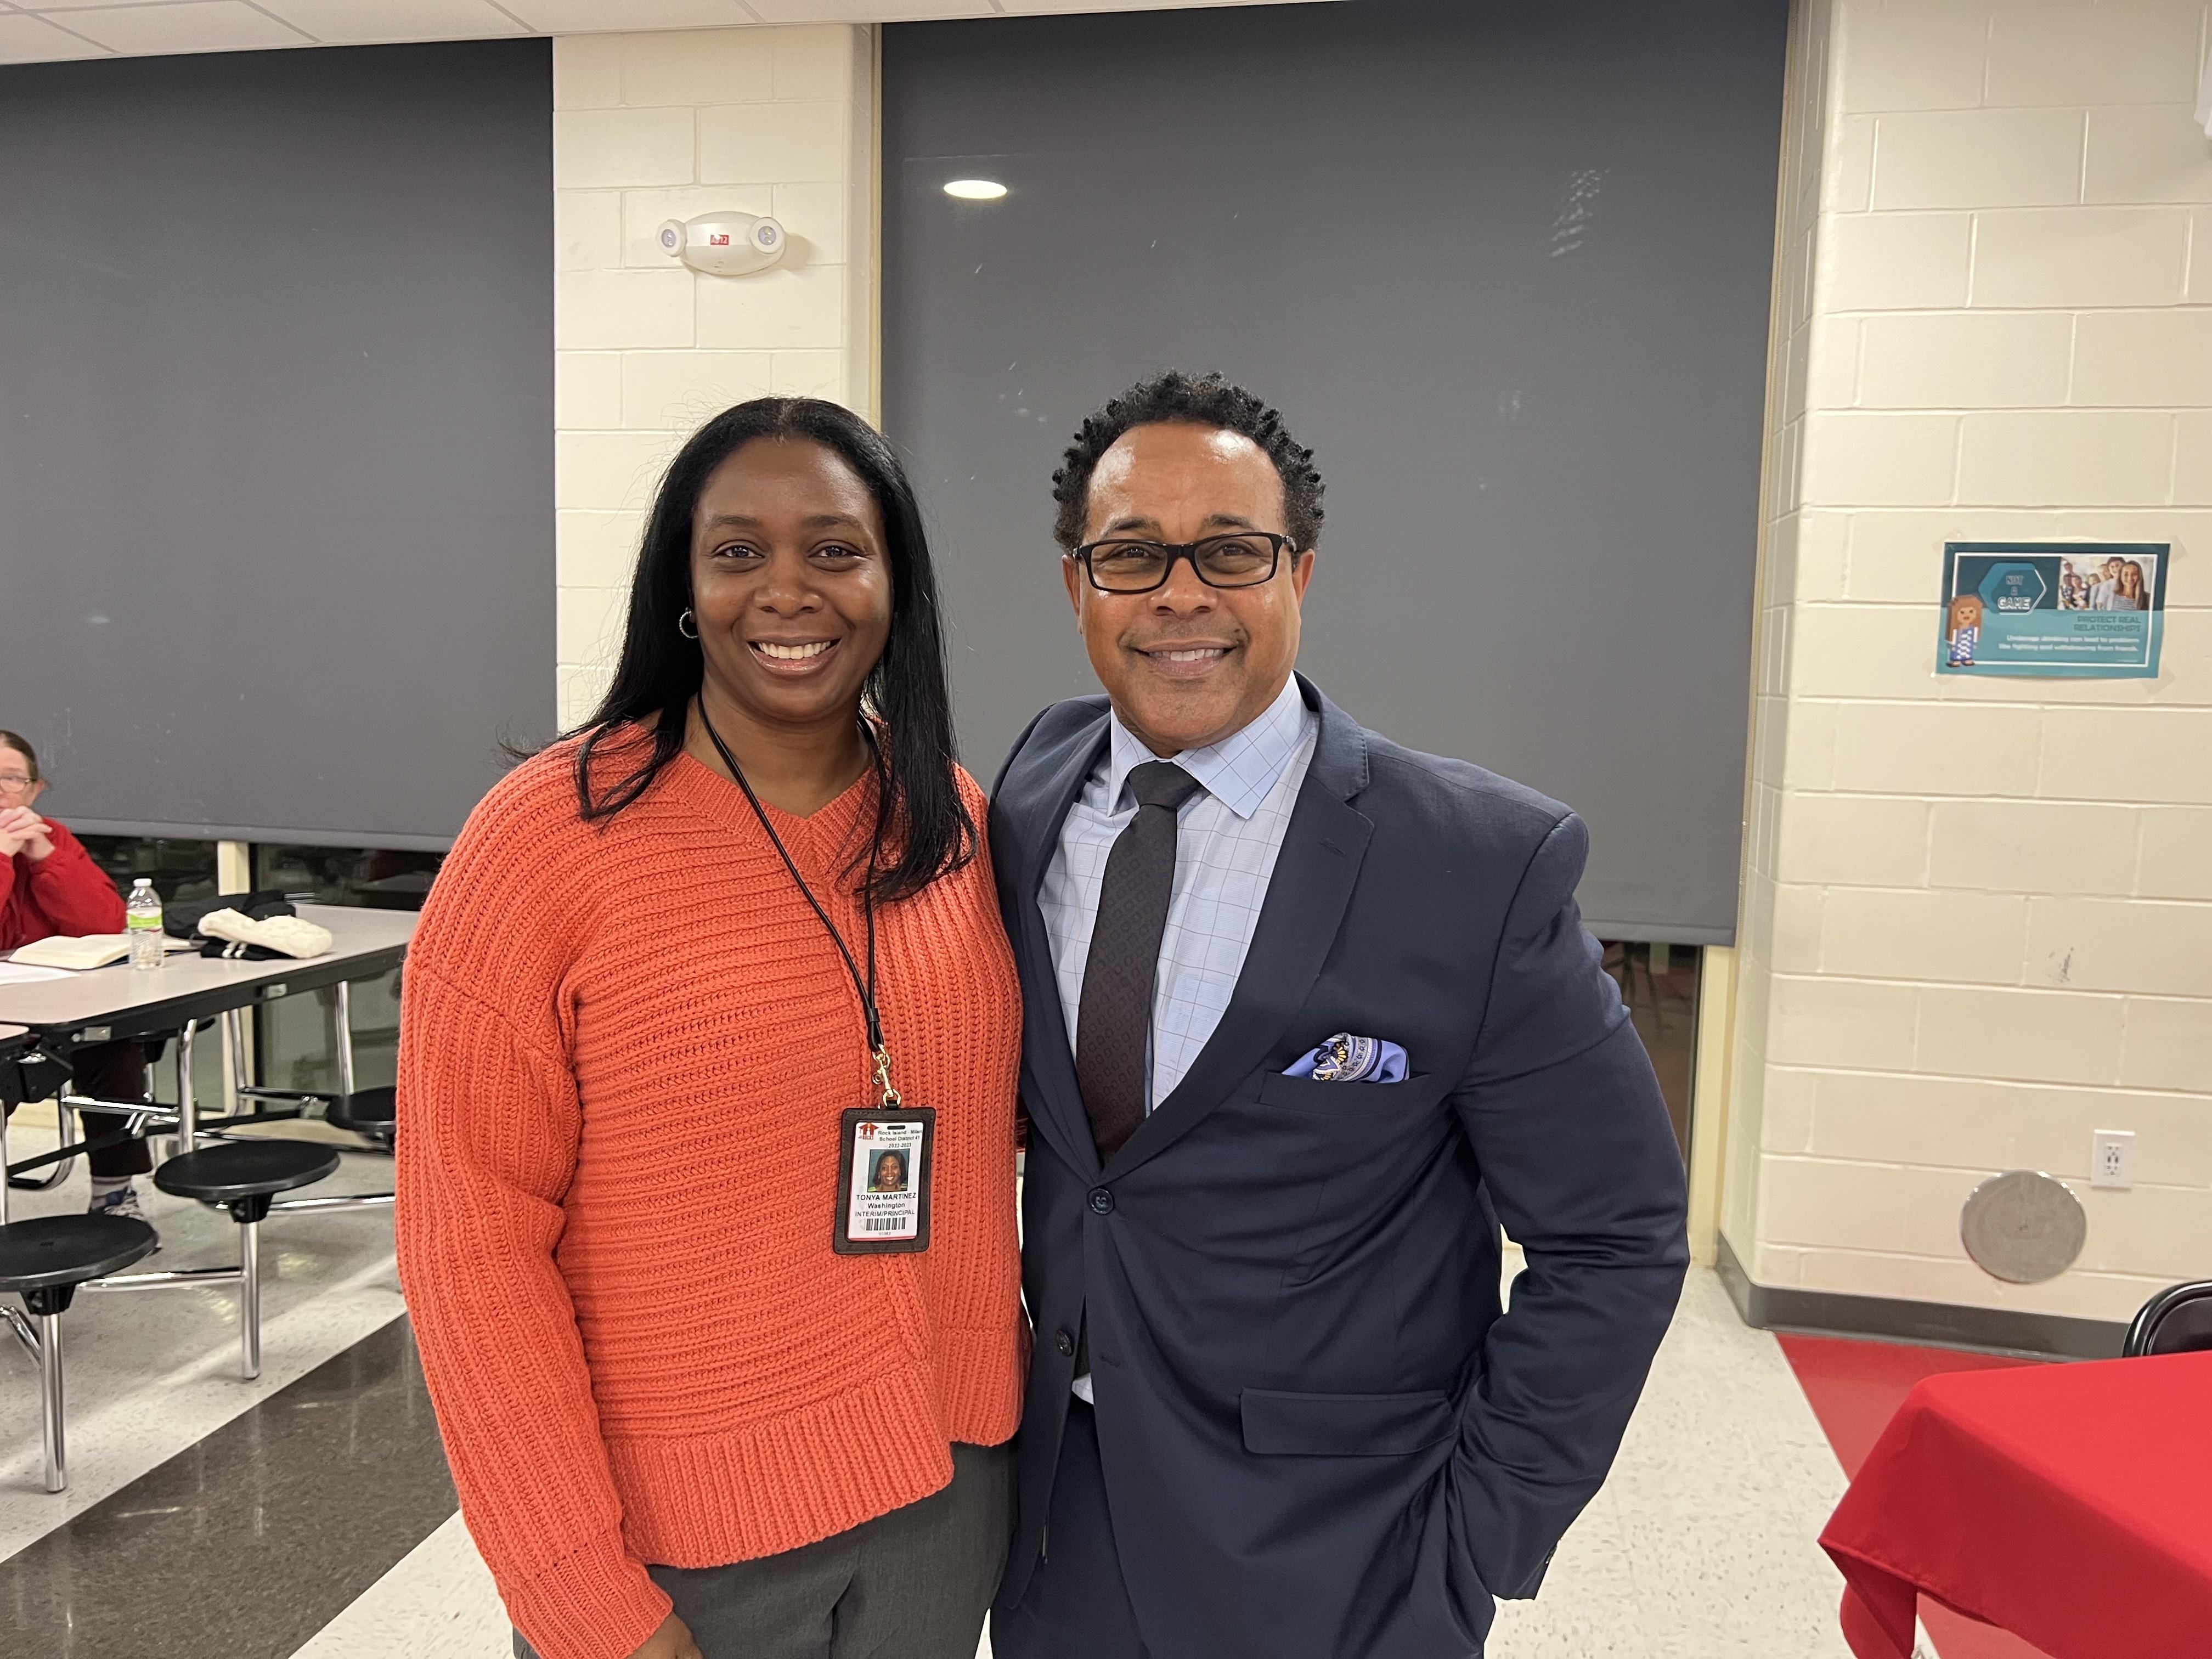 Tonya Smith with Superintendent Dr. Lawrence